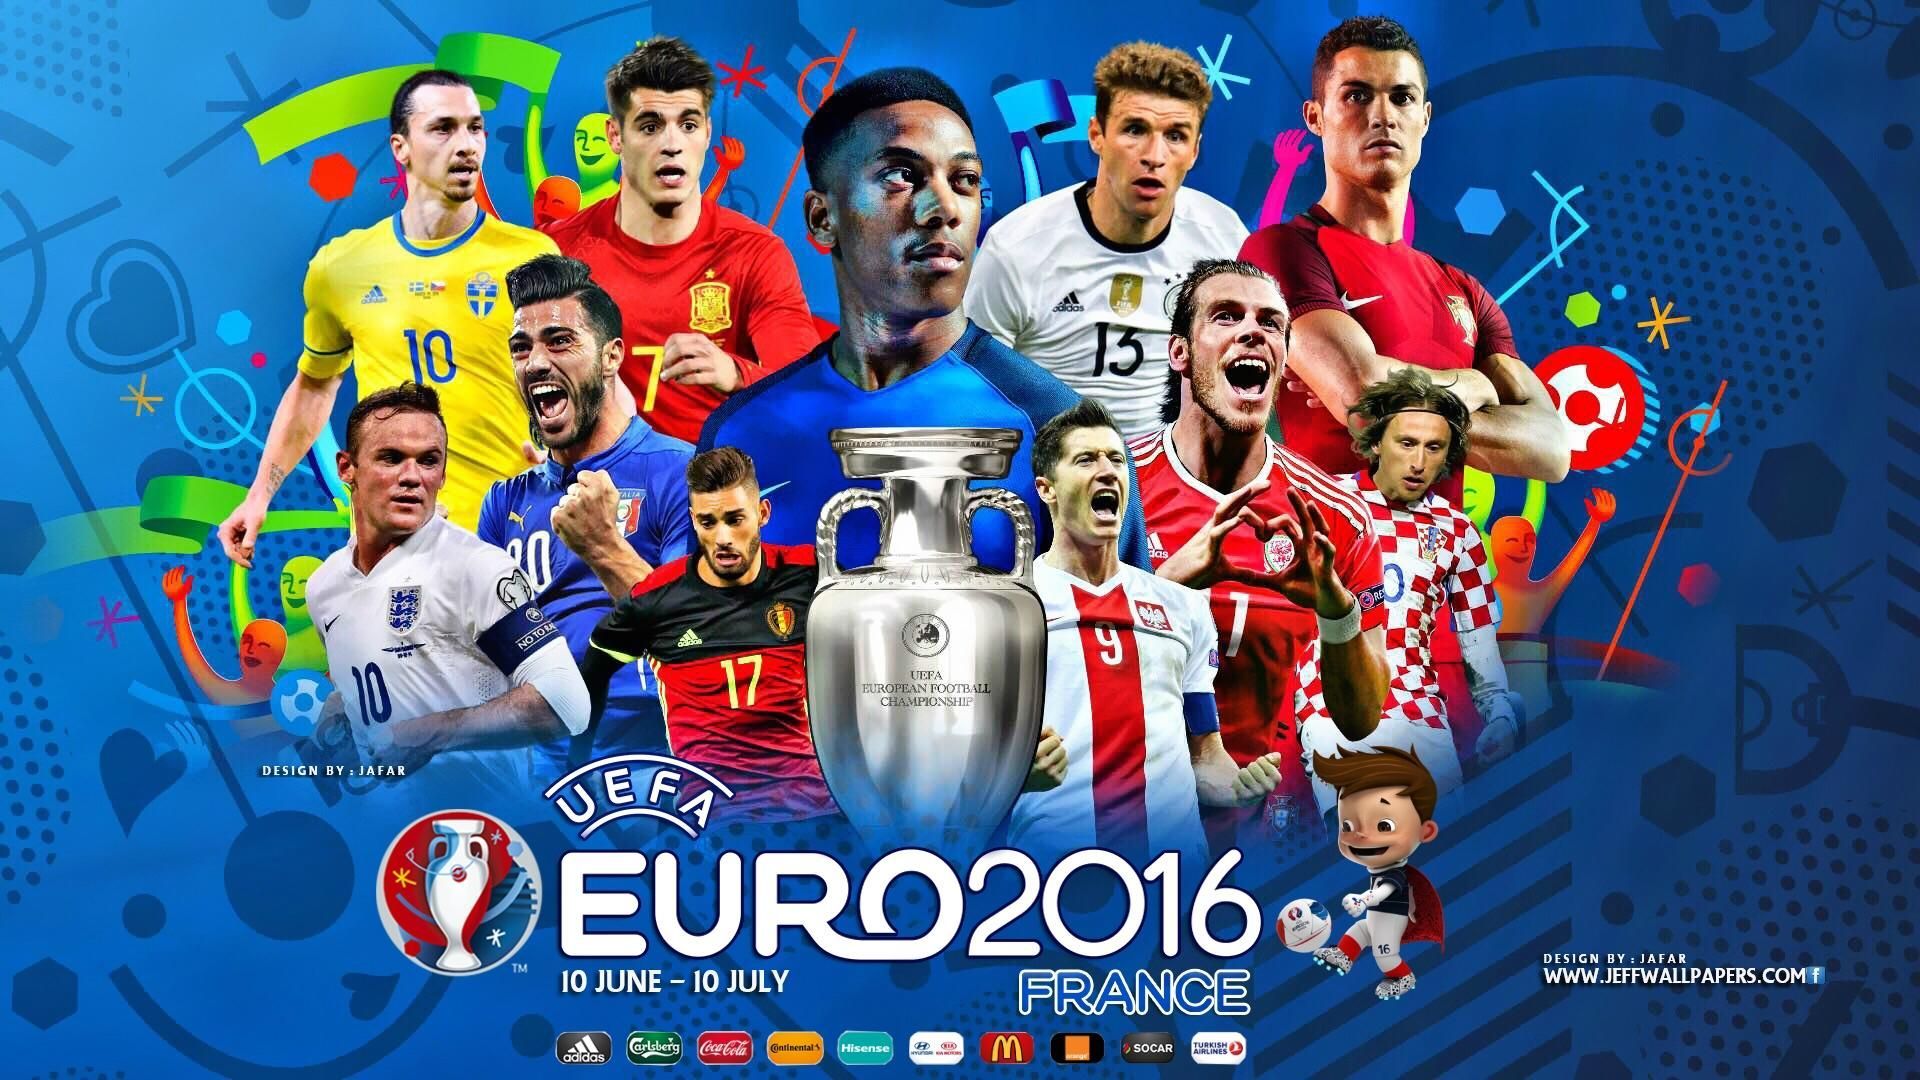 Who won euro cup 2016?